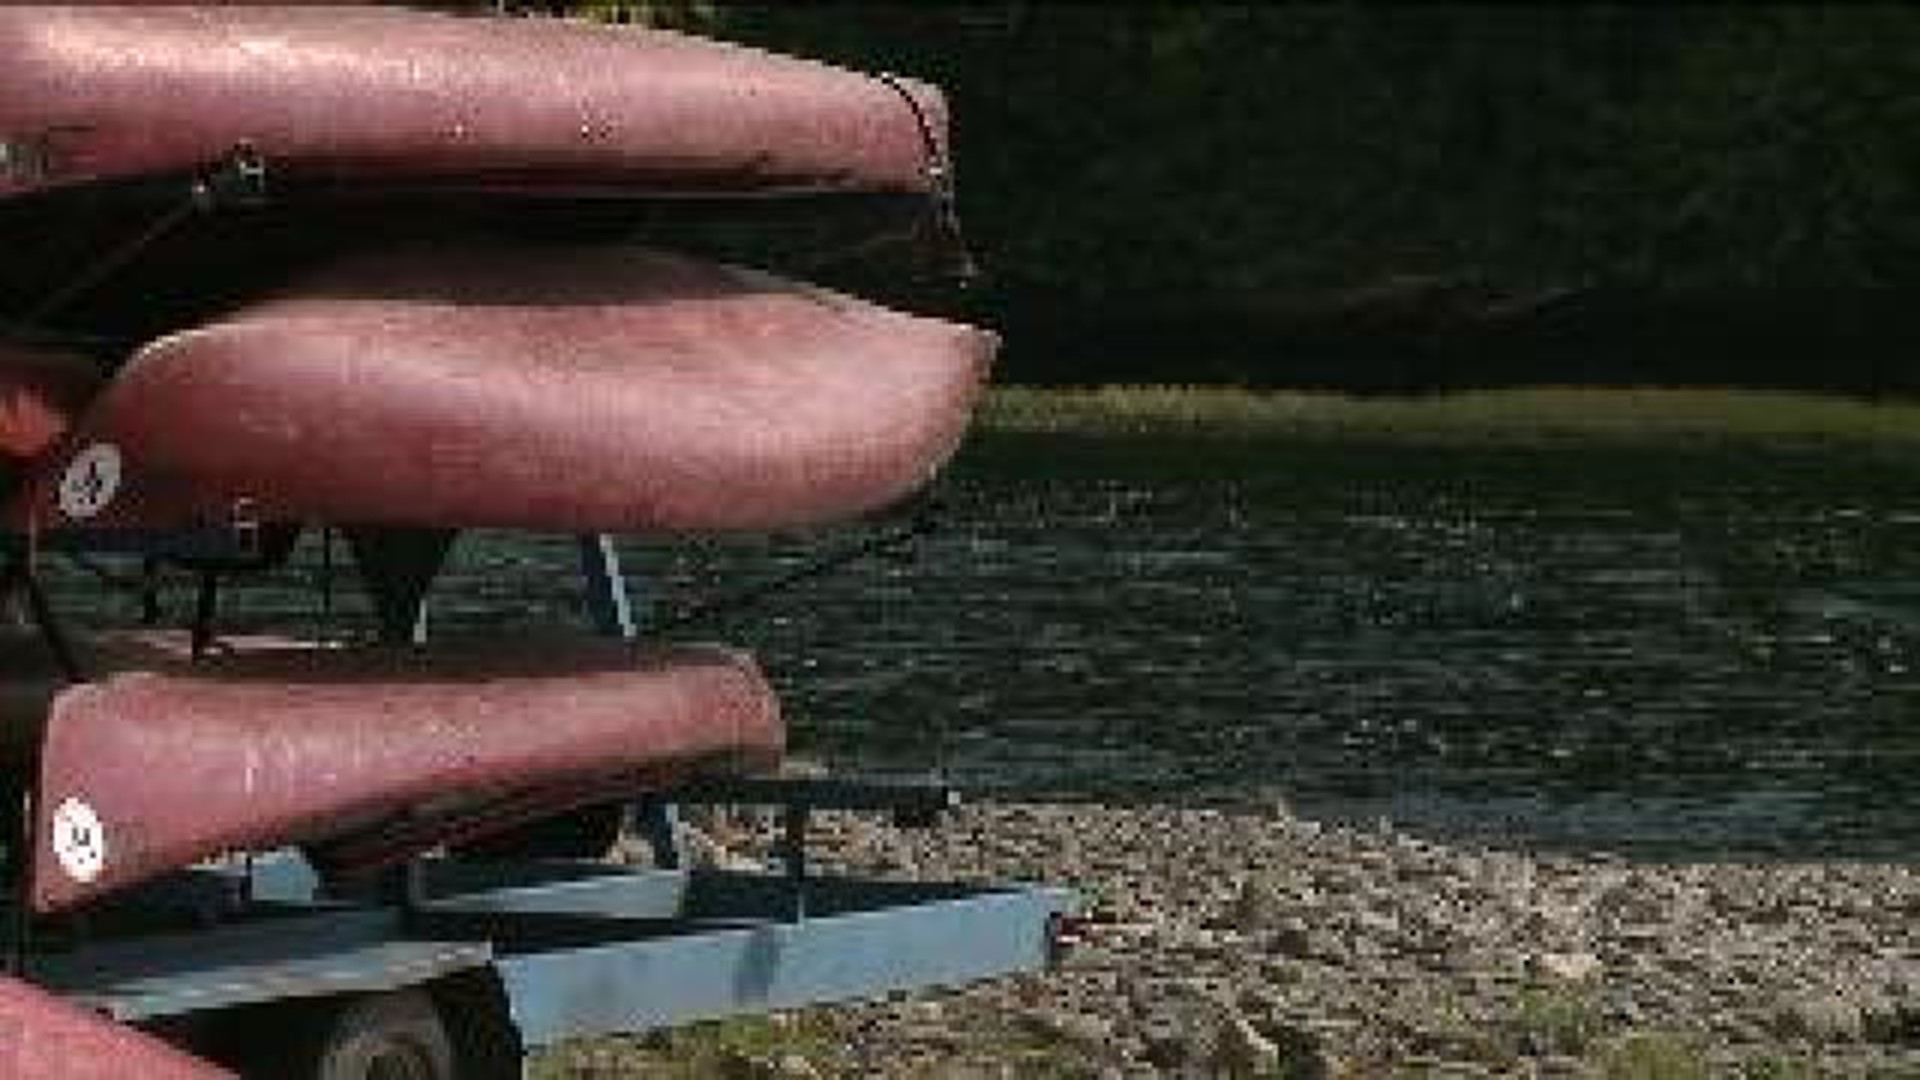 Government Shutdown Slowing Down Canoe Business